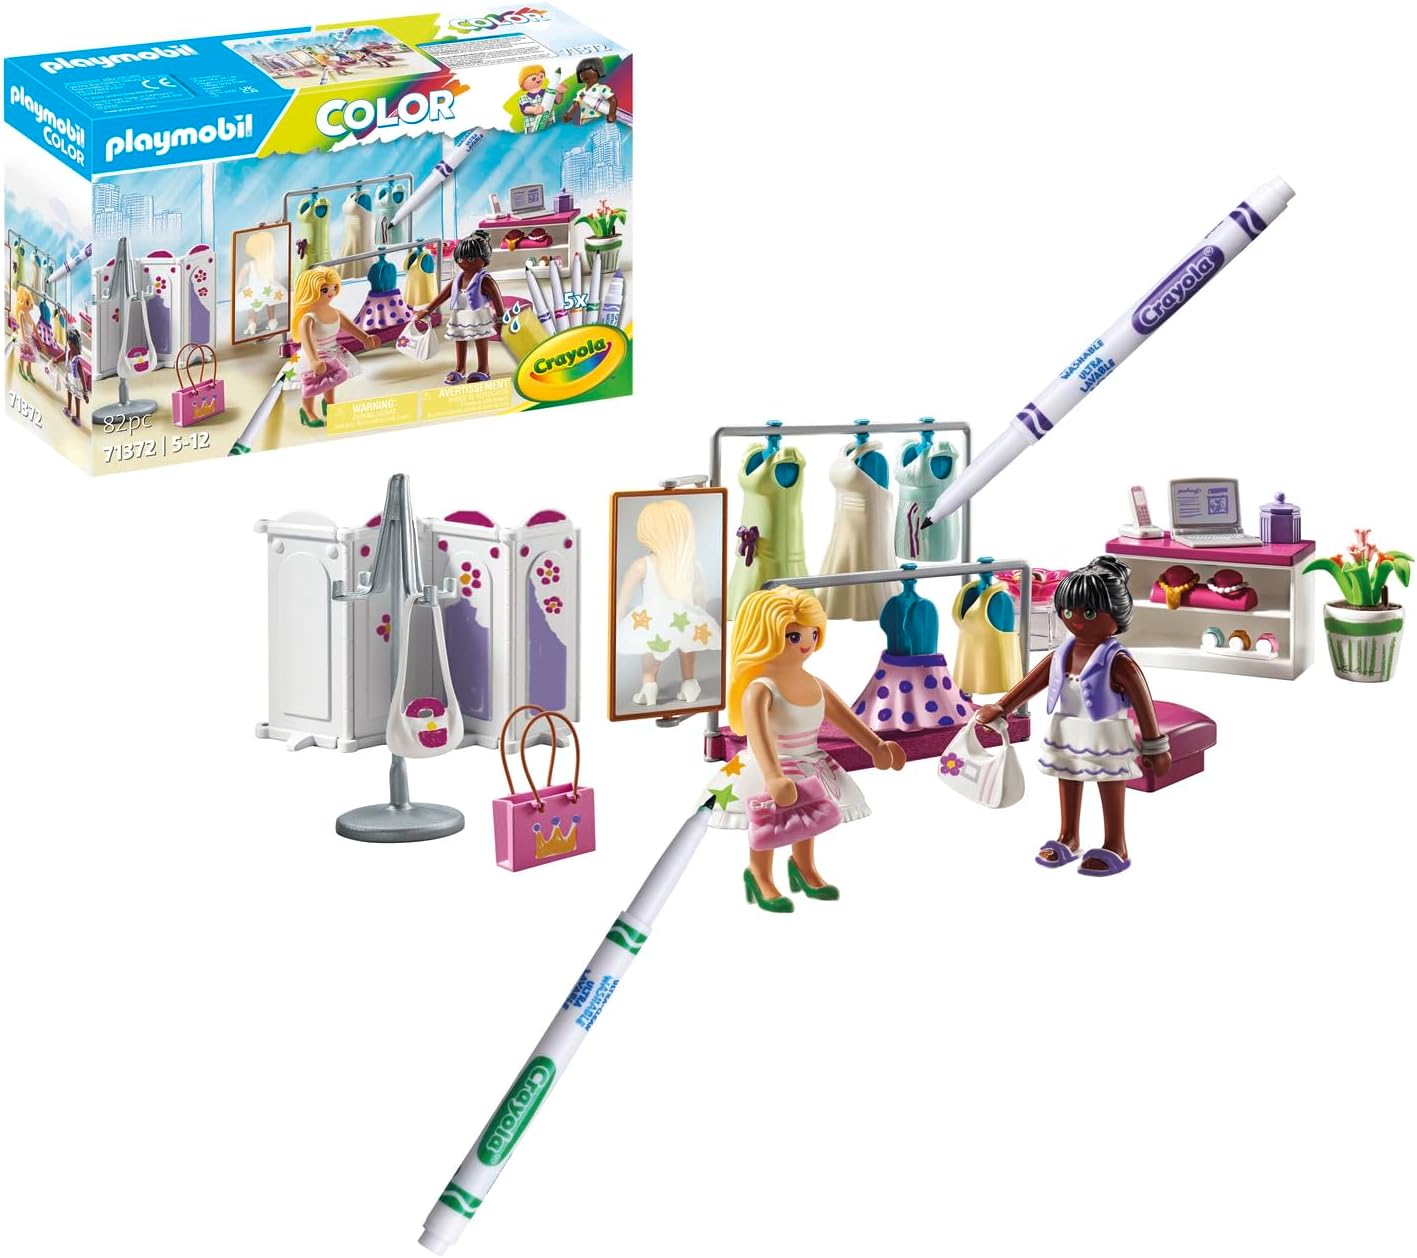 PLAYMOBIL Color 71372 Fashion Boutique Creative Design for Various Clothing Styles with Water Soluble Pens Sponge and Numerous Accessories Artistic Toy for Children Aged 5 Years and Up